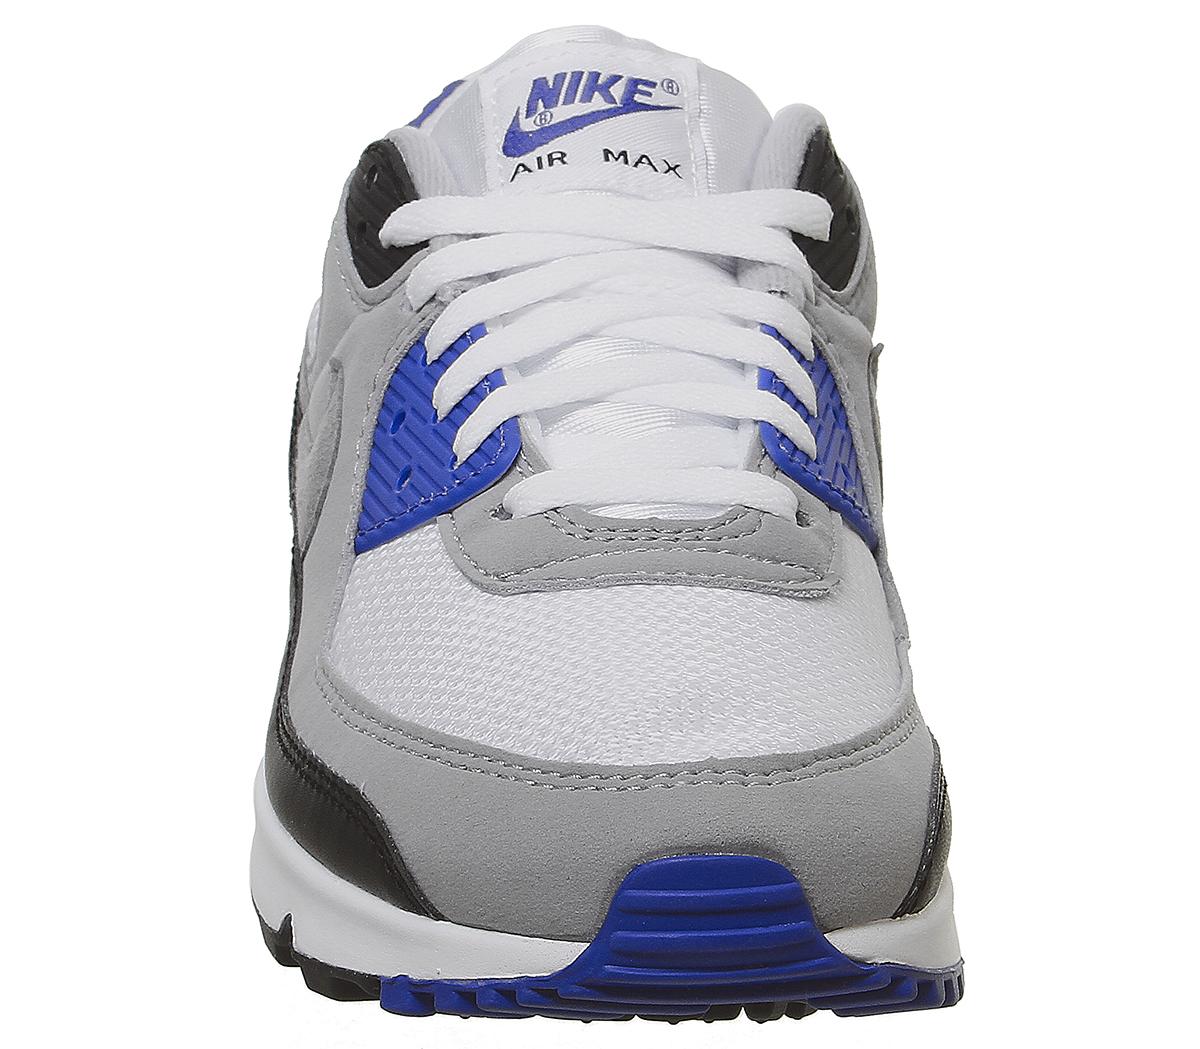 Nike Air Max 90 Trainers White Particle Grey Black Hyper Royal - Unisex ...